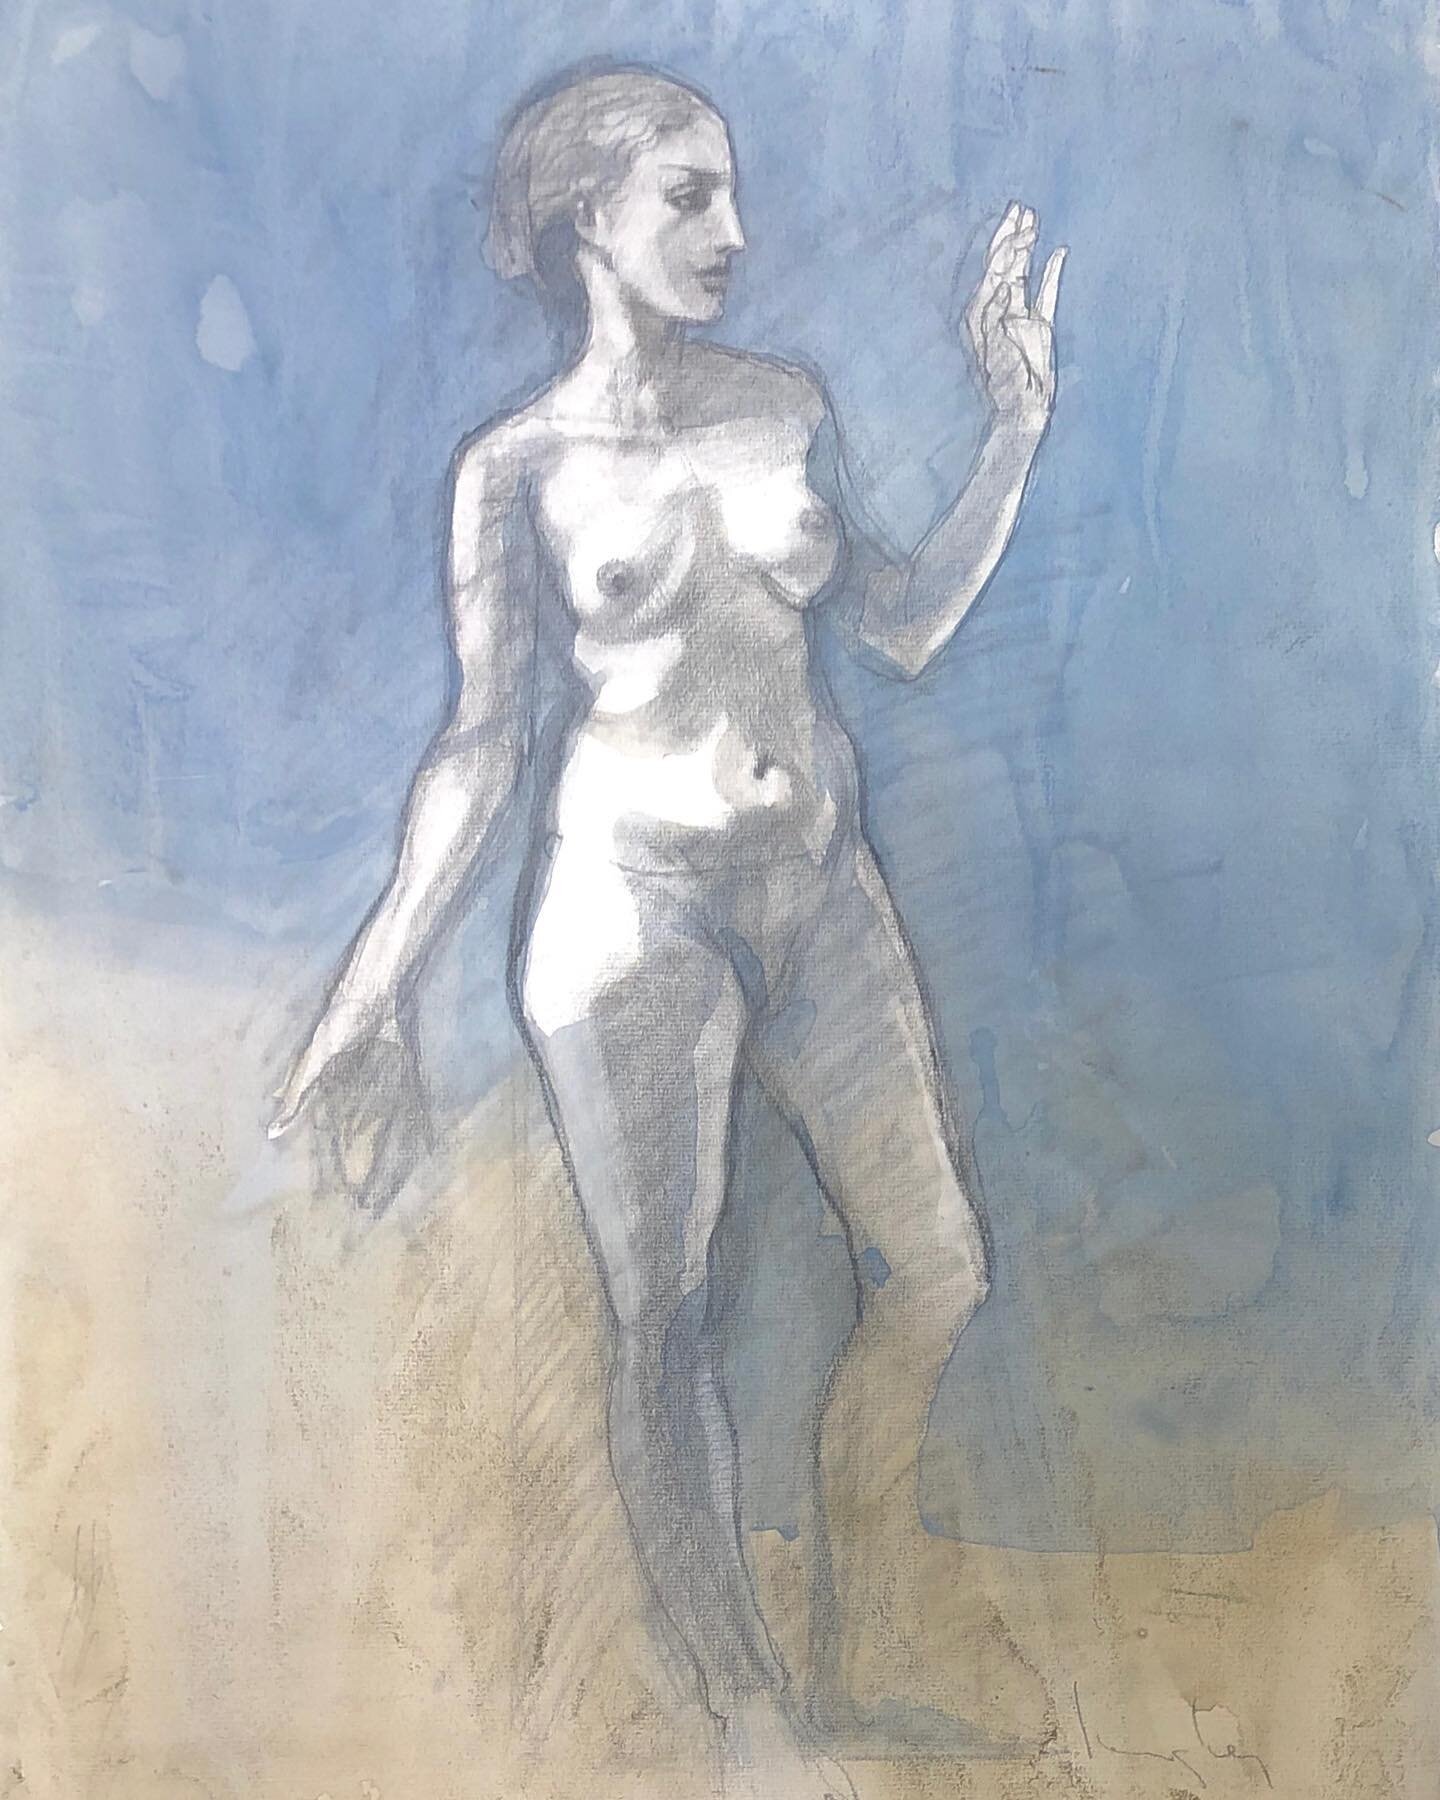 Variations on pose of a woman standing with senses wide open. 

Some models embody sensory wakefulness: they are at ease with themselves, feel more balanced emotionally, think more clearly, and experience genuine pleasure in their physical connection